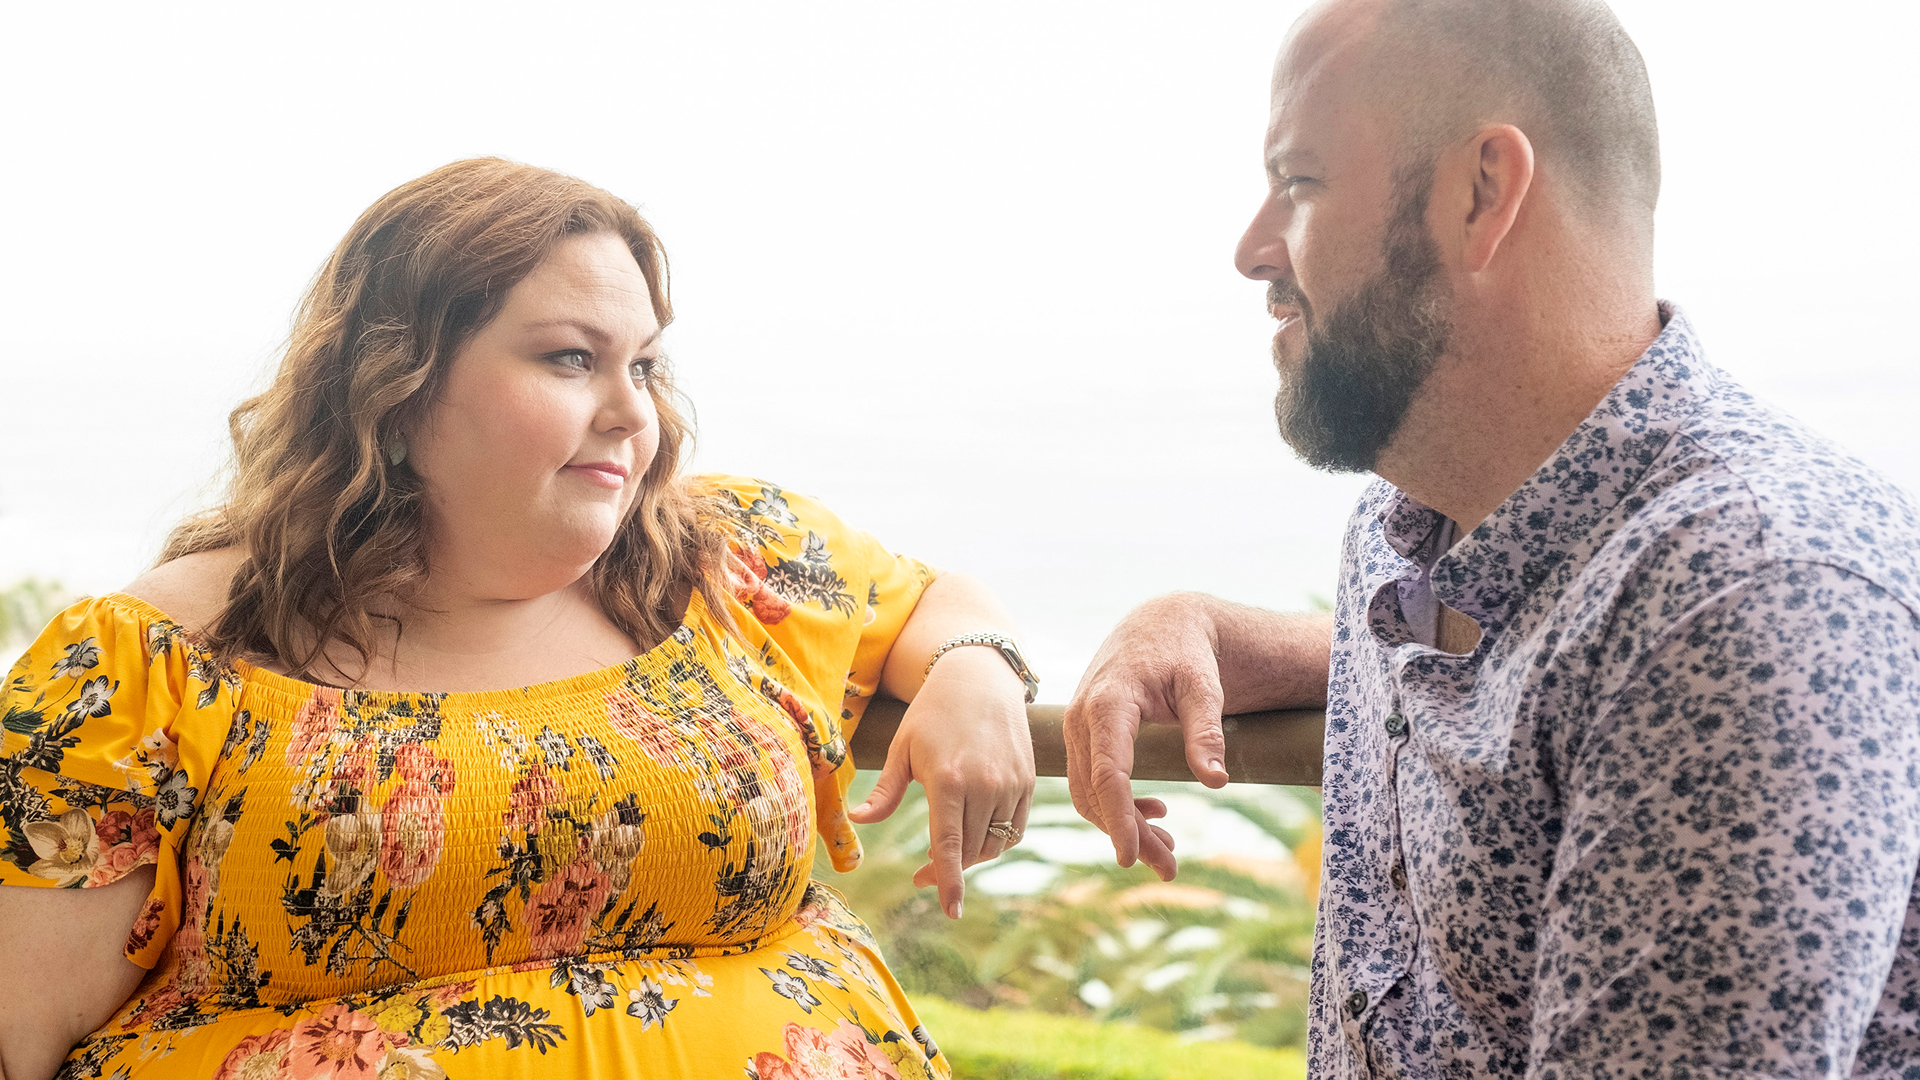 Chrissy Metz wears a yellow floral dress as she looks at Chris Sullivan in a scene from ‘This Is Us’ Season 5